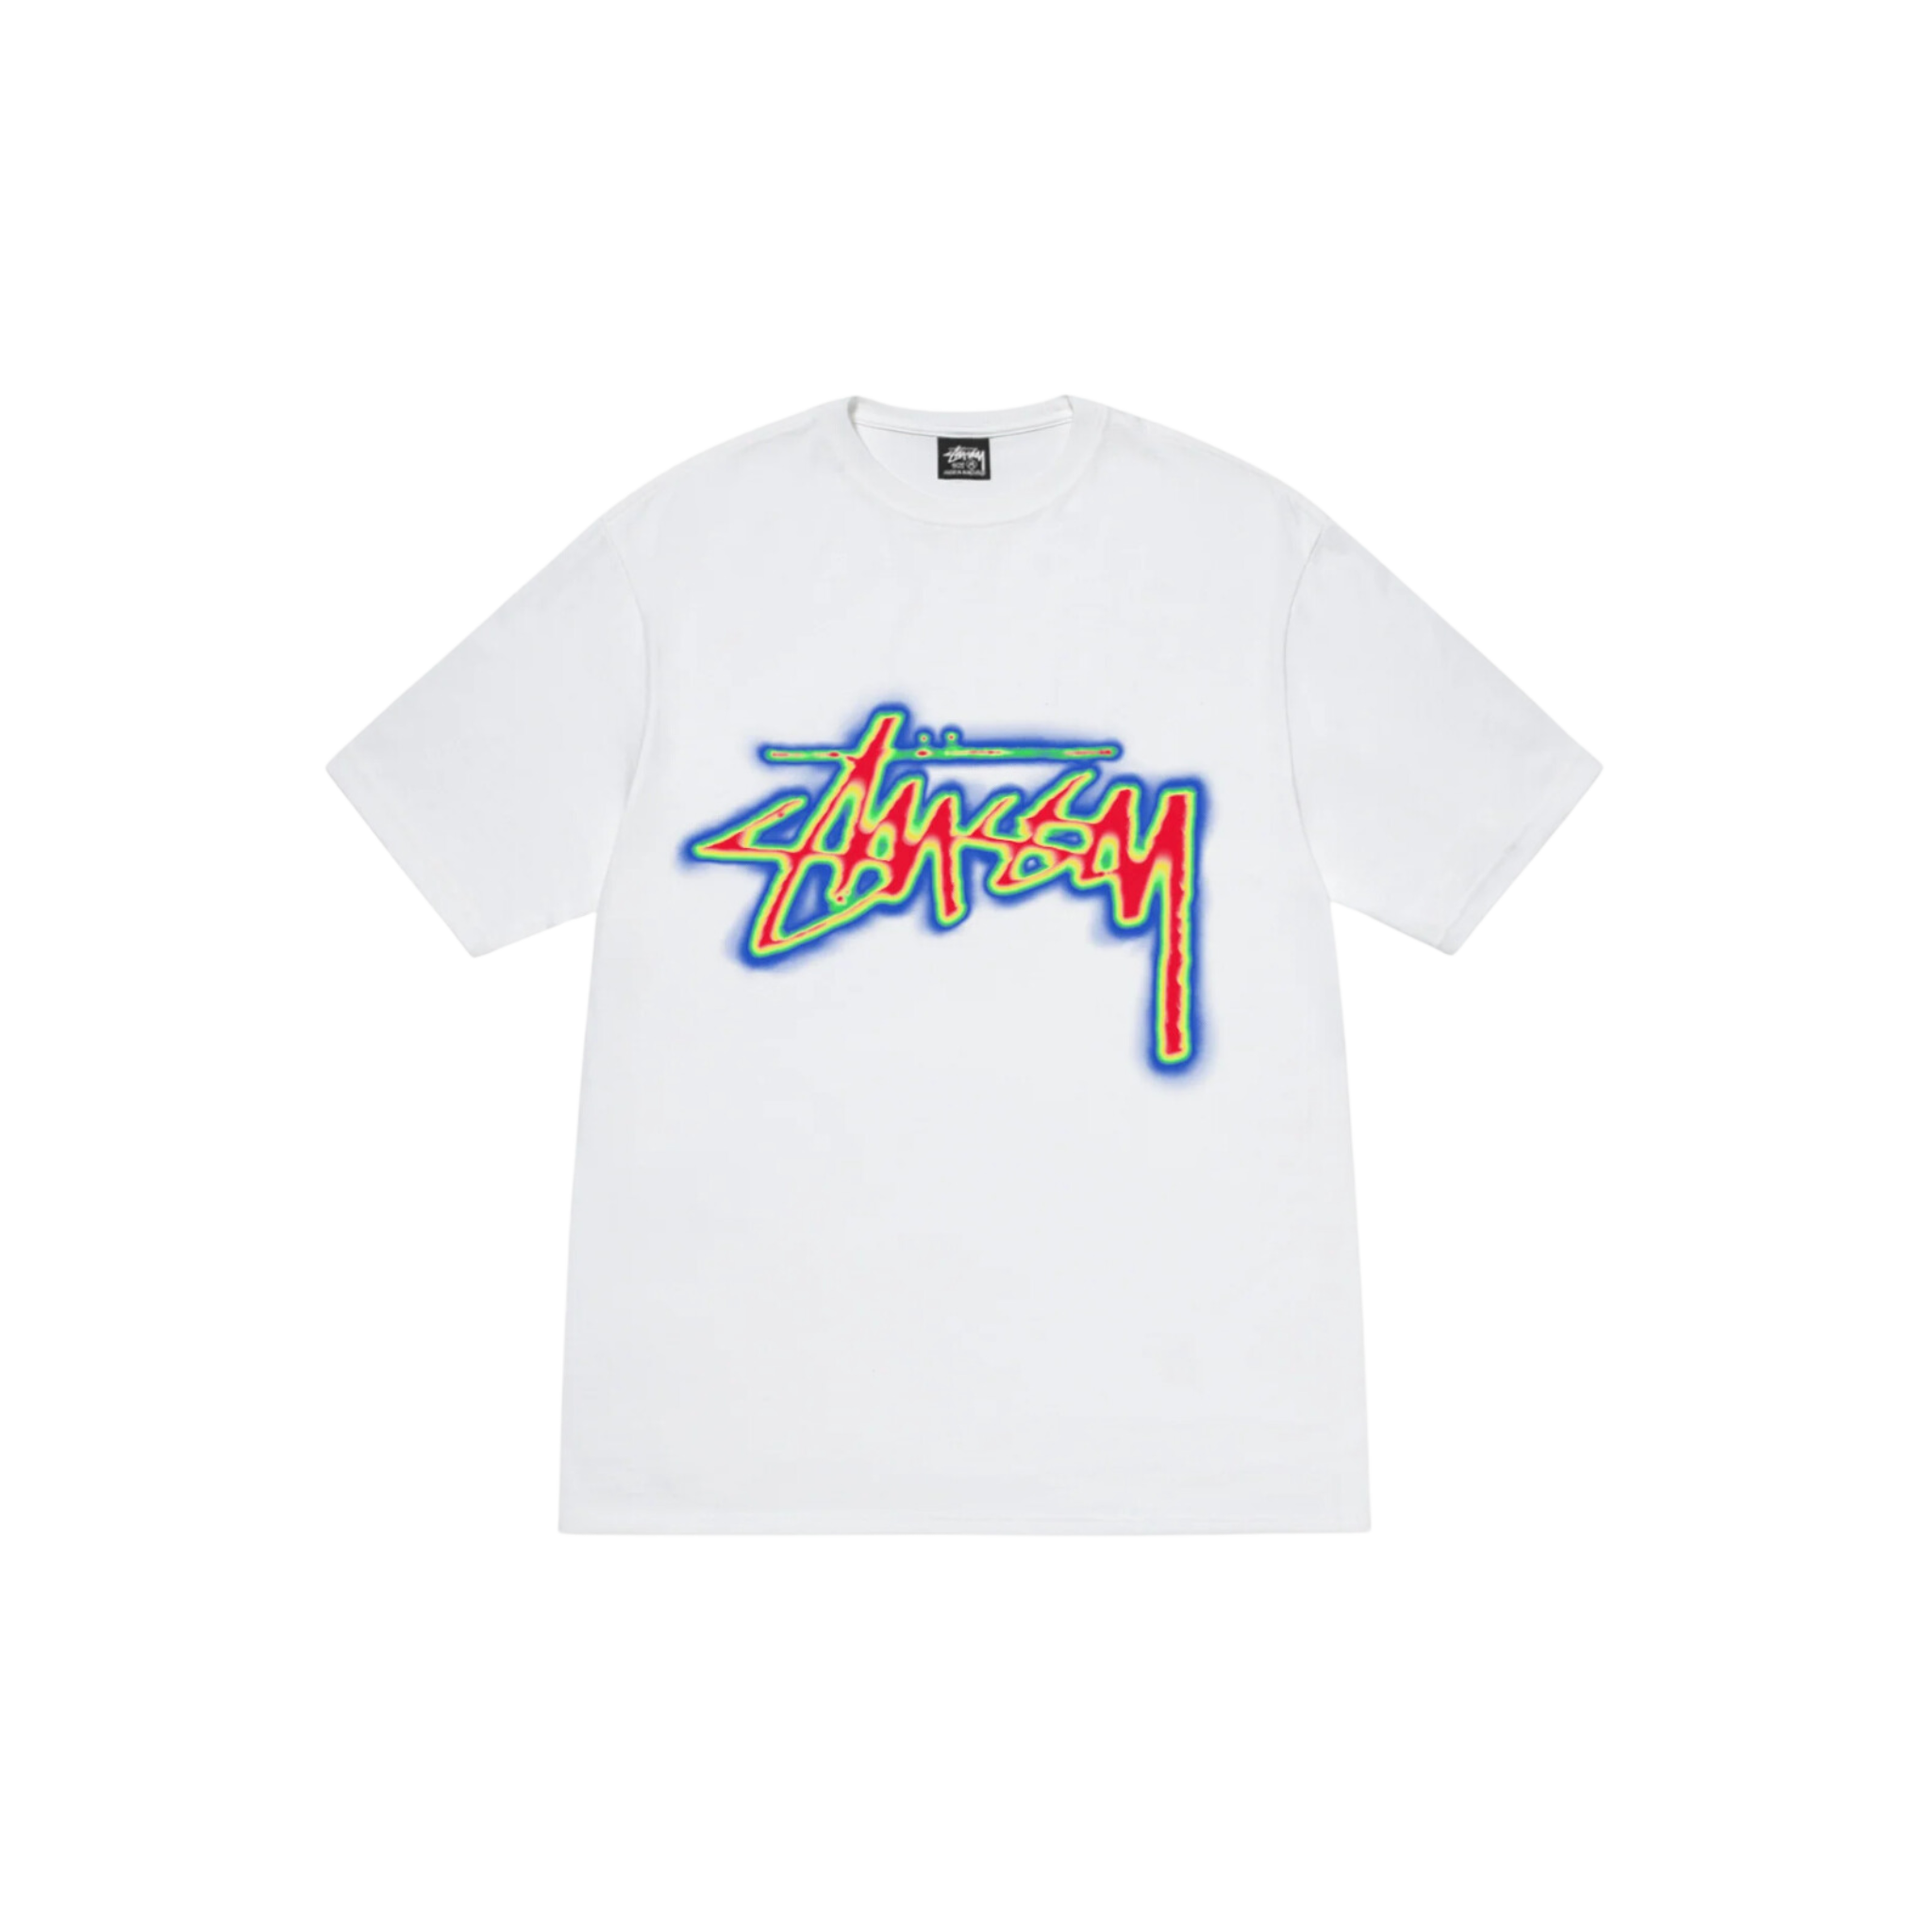 STÜSSY Thermal Stock Tee White